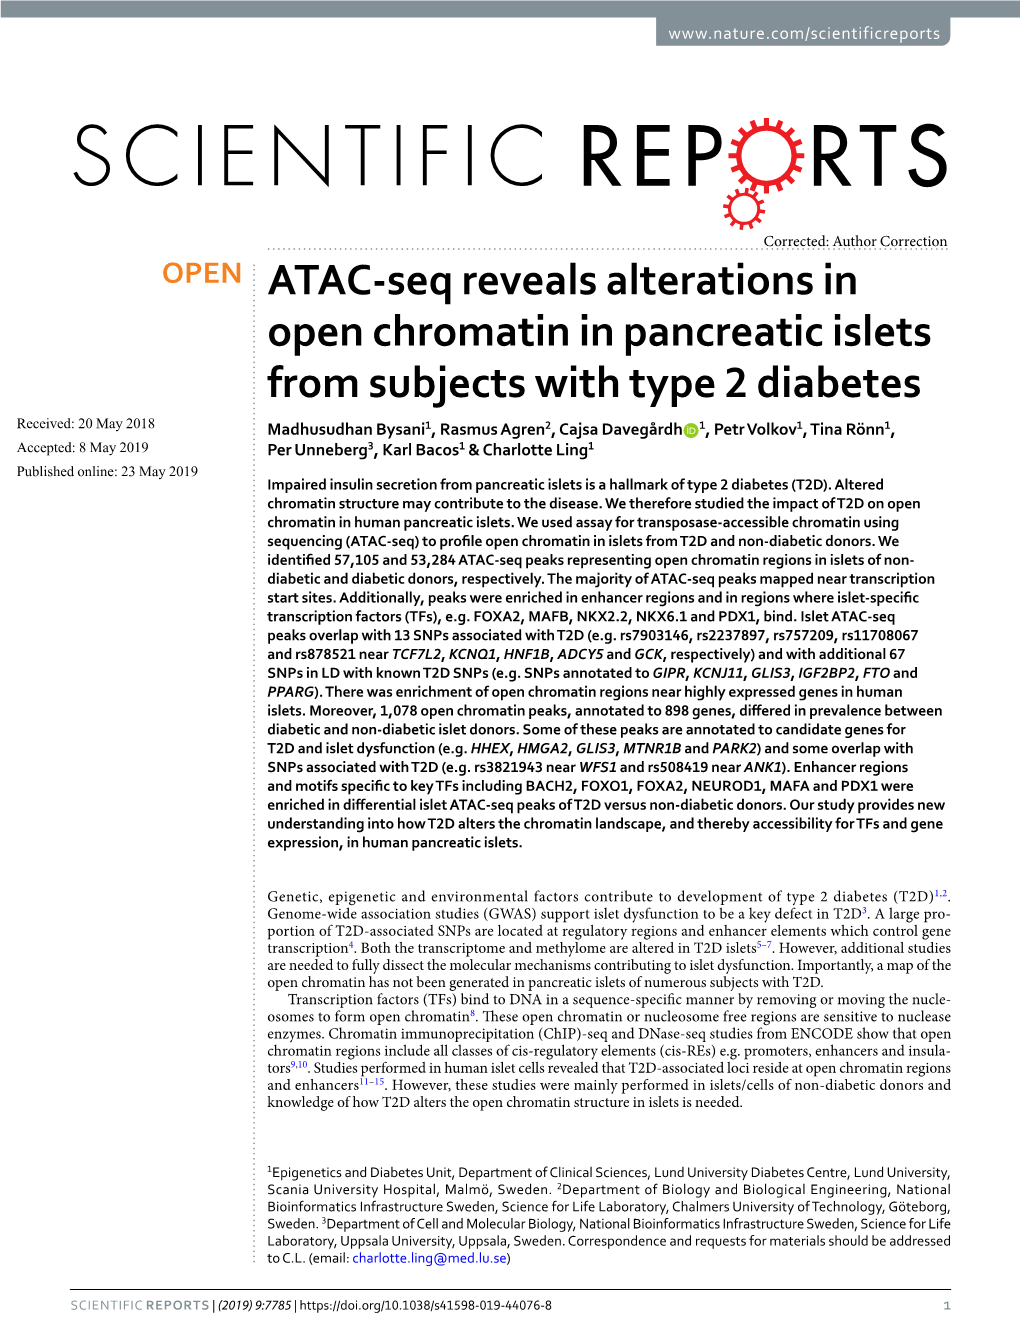 ATAC-Seq Reveals Alterations in Open Chromatin in Pancreatic Islets From